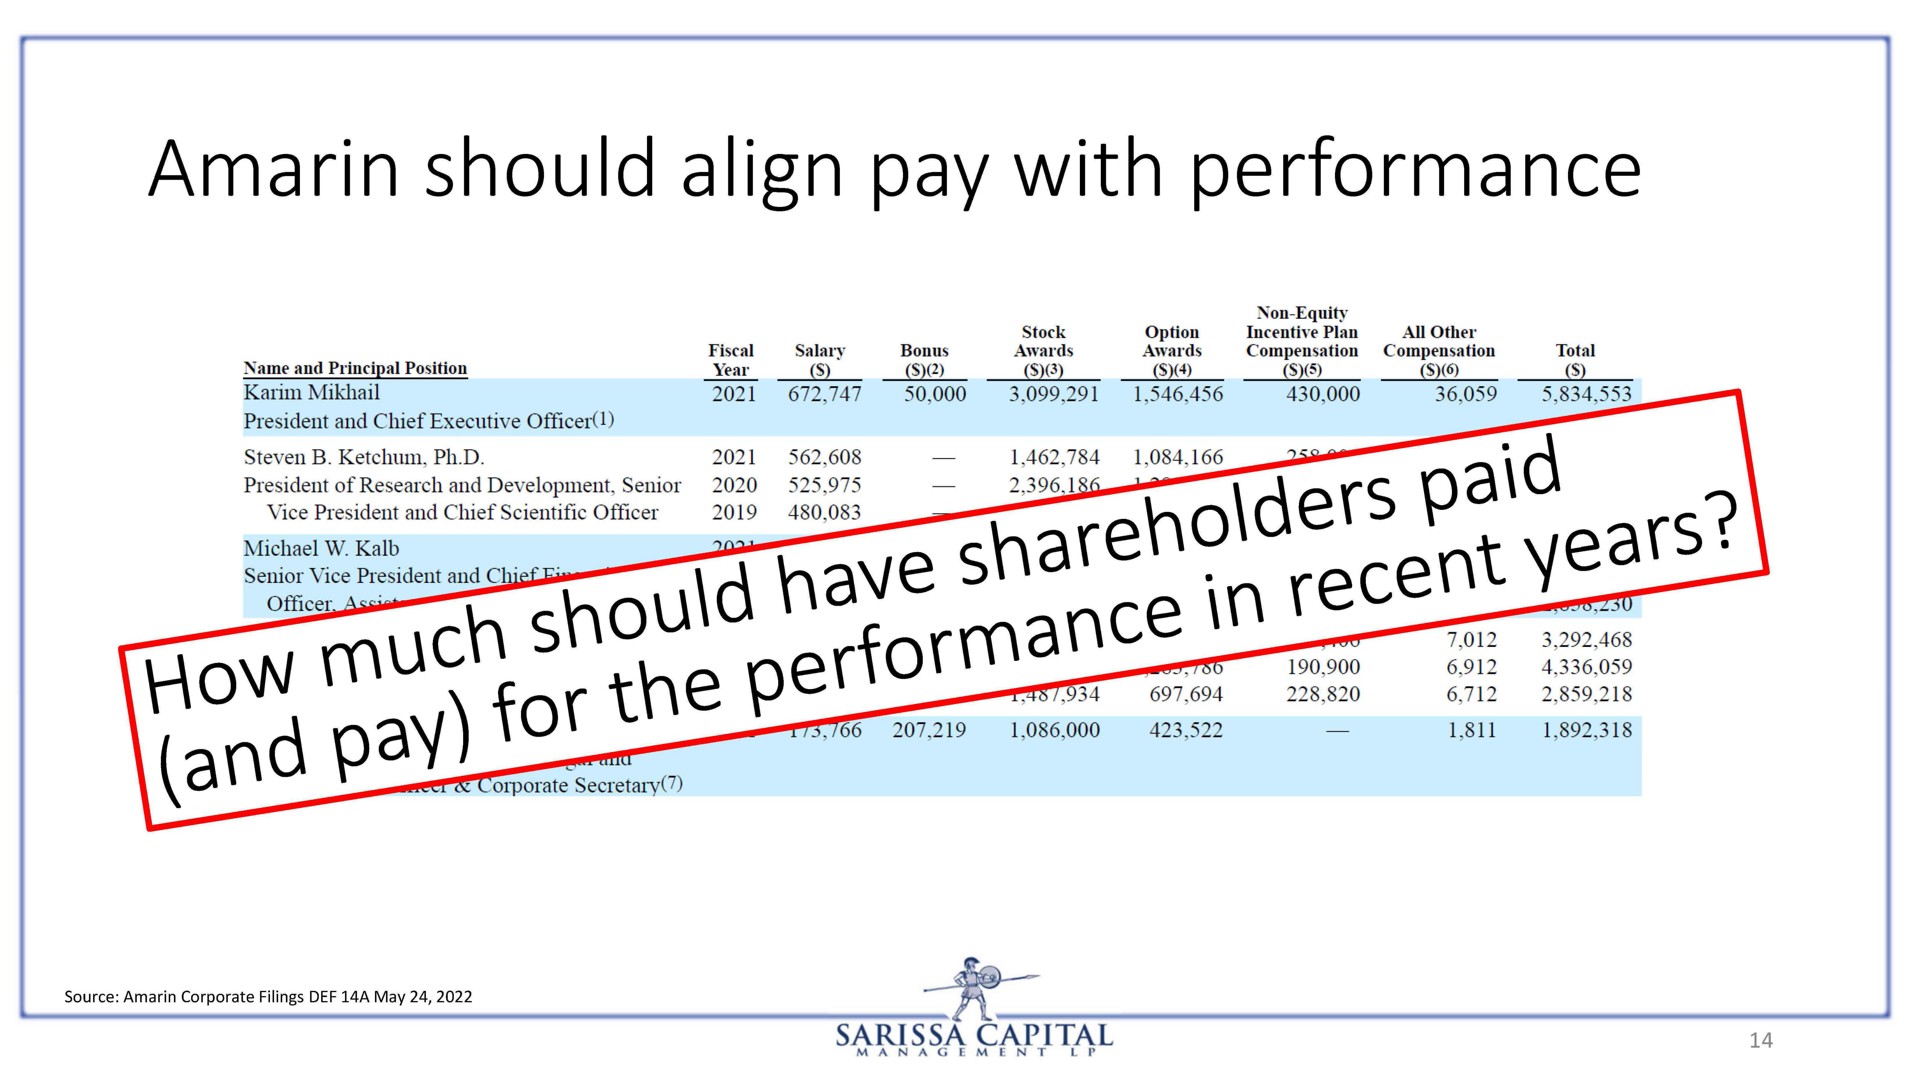 amarin should align pay with performance | Sarissa Capital